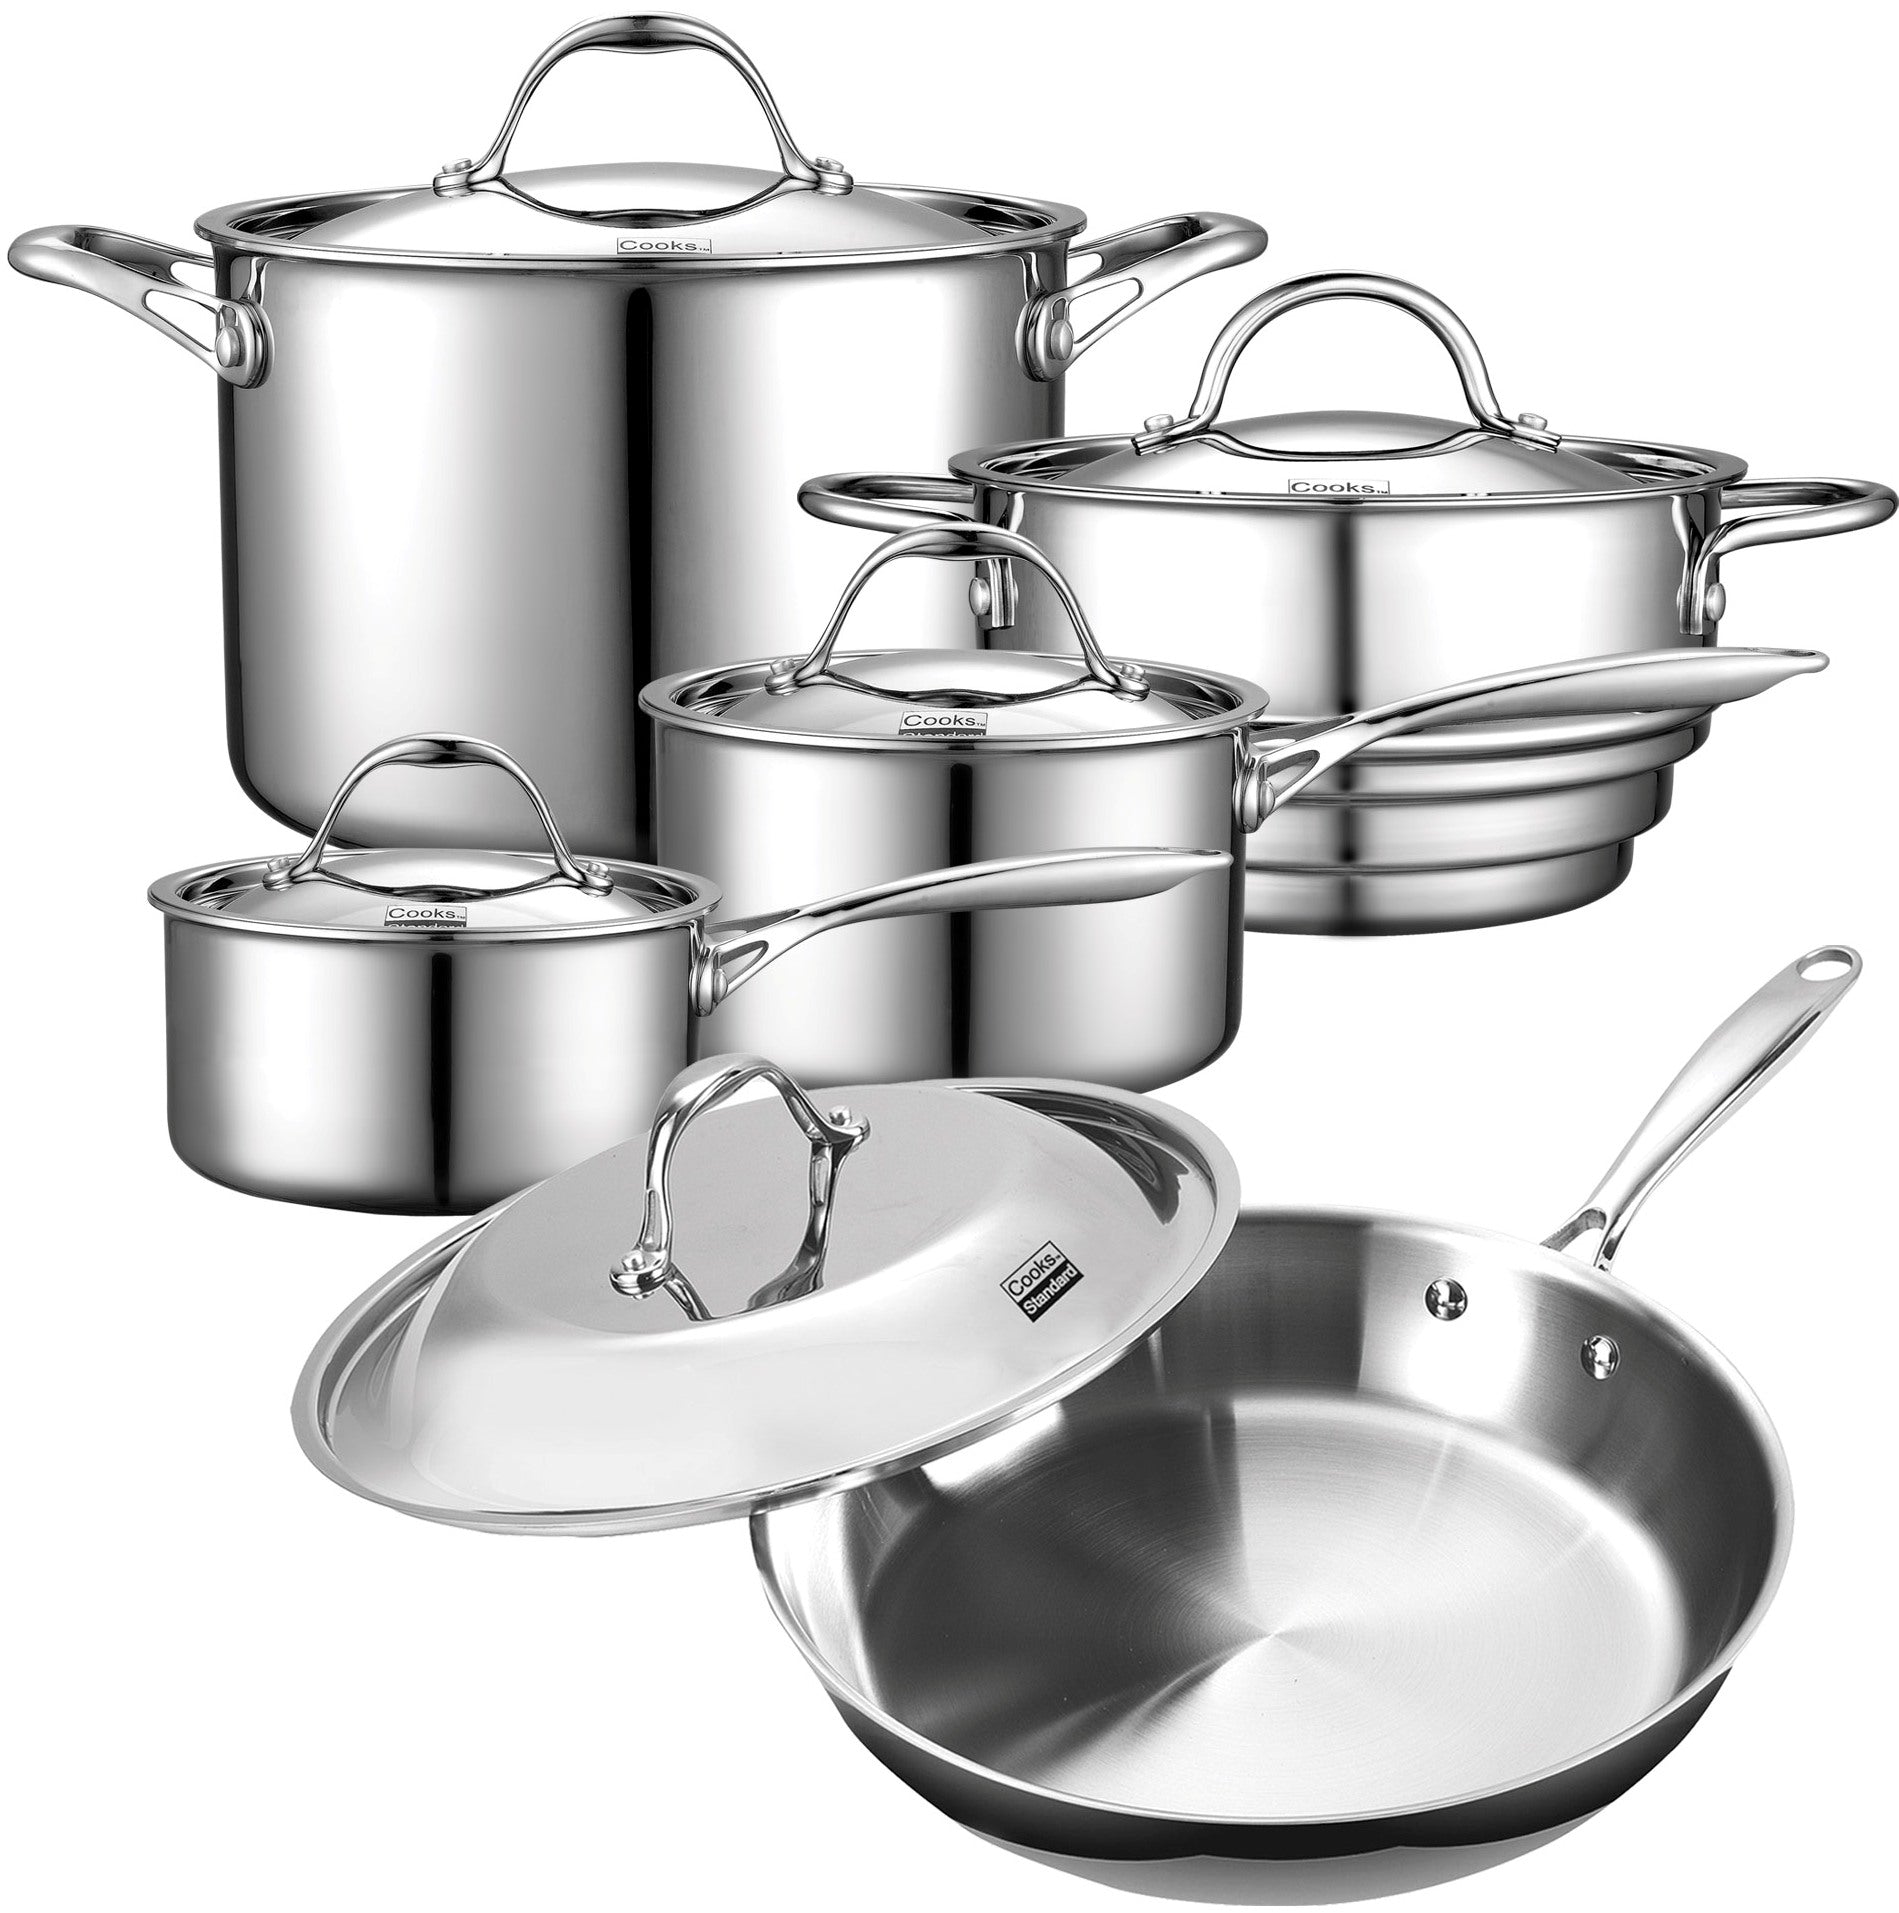 Cooks Standard Stainless Steel Kitchen Cookware Sets 10-Piece, Multi-P